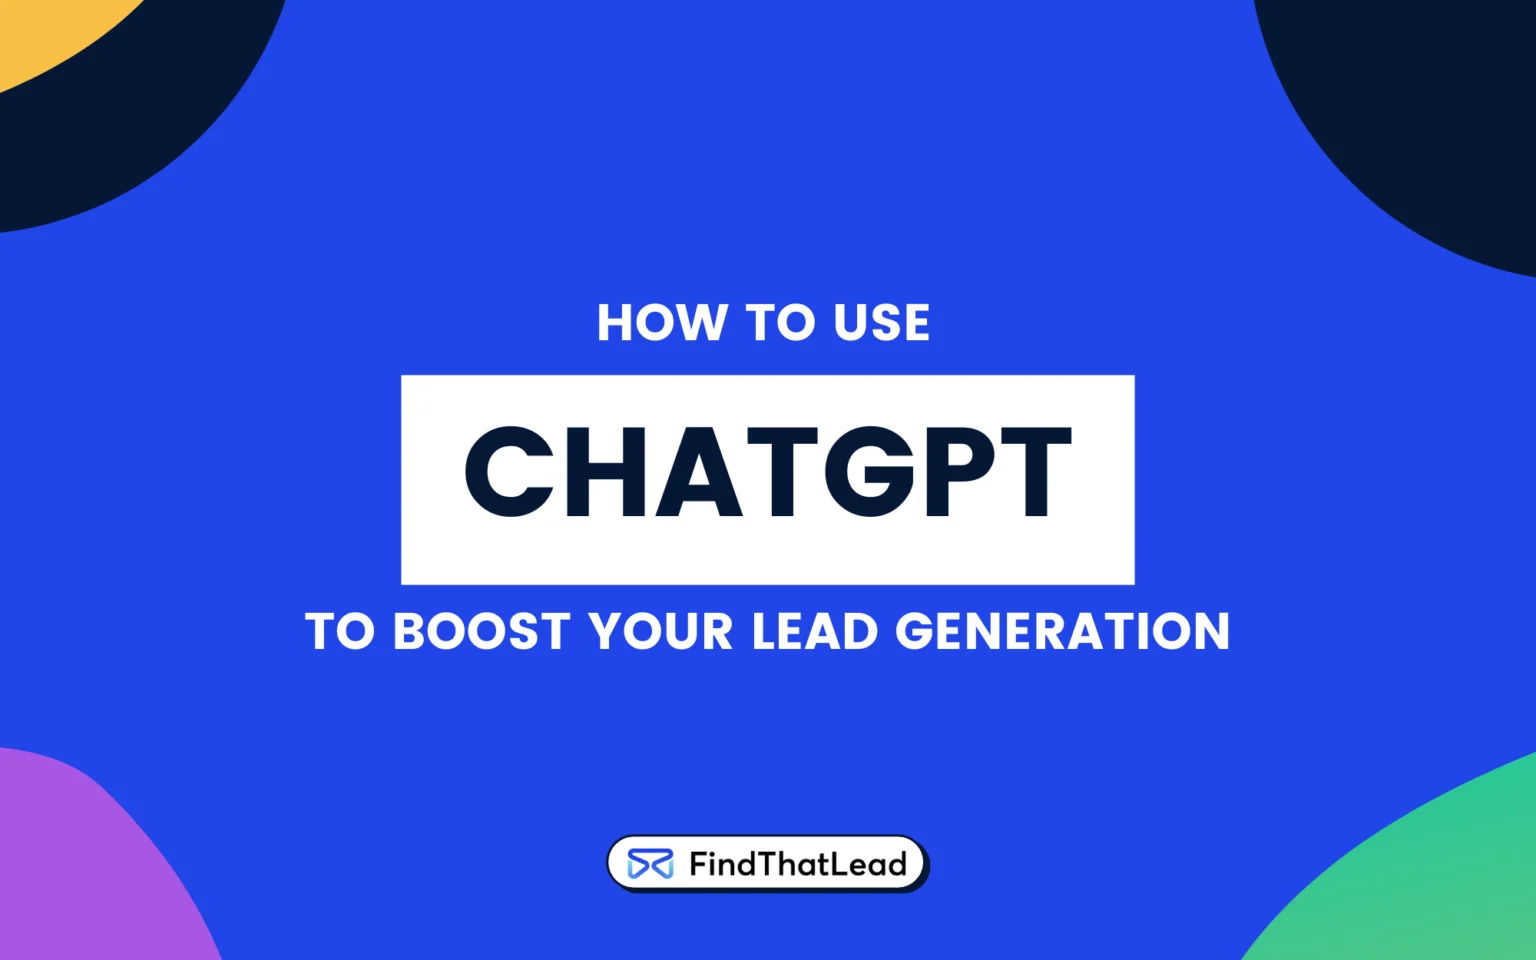 10 Ways to Generate Leads with ChatGPT in Seconds